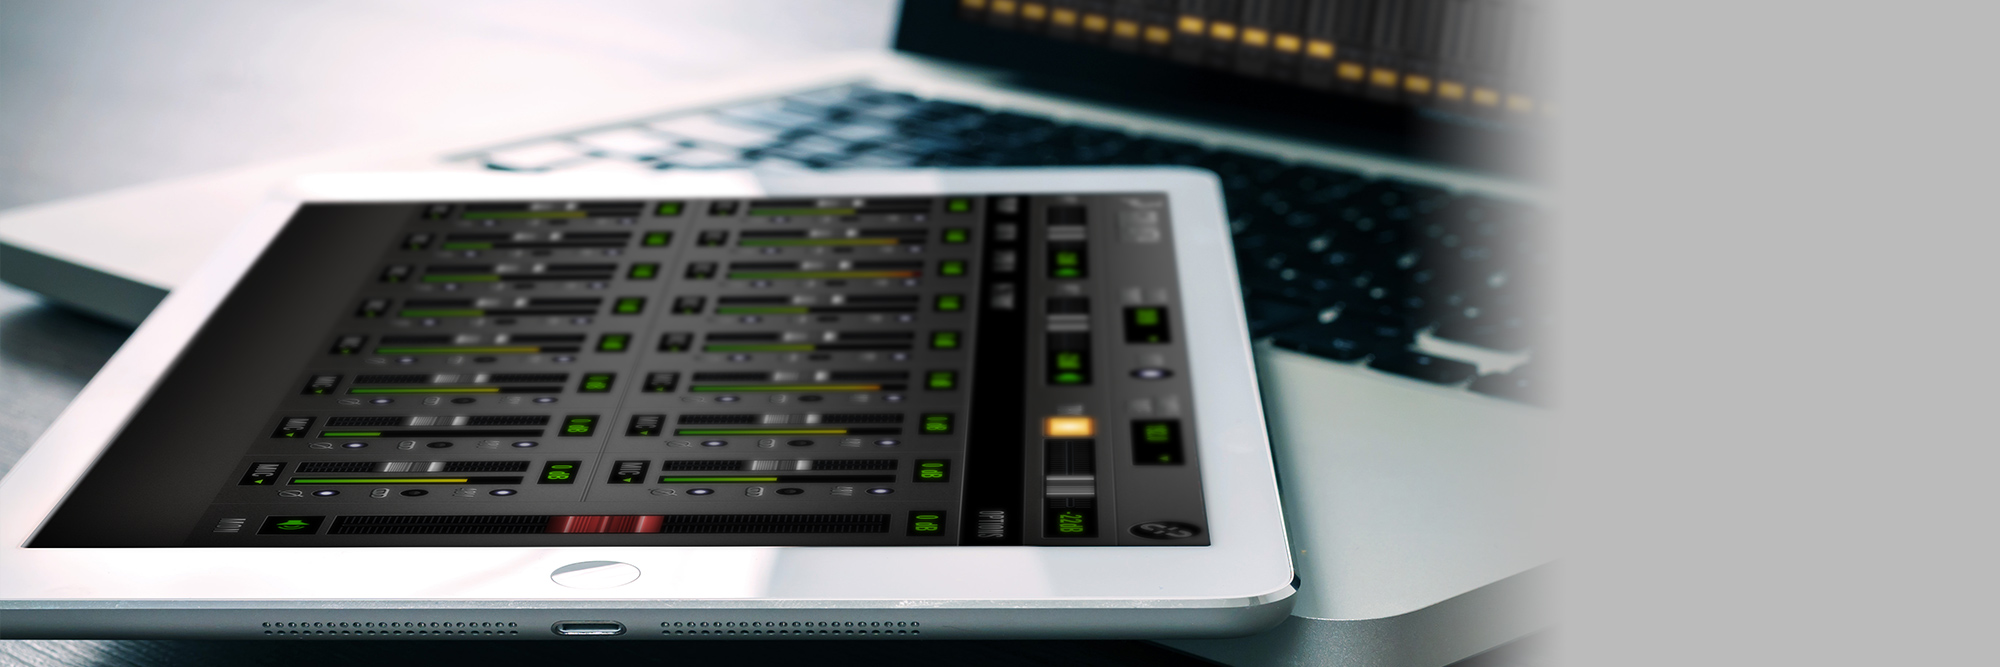 Antelope Audio just launched remote control apps for some of their interfaces